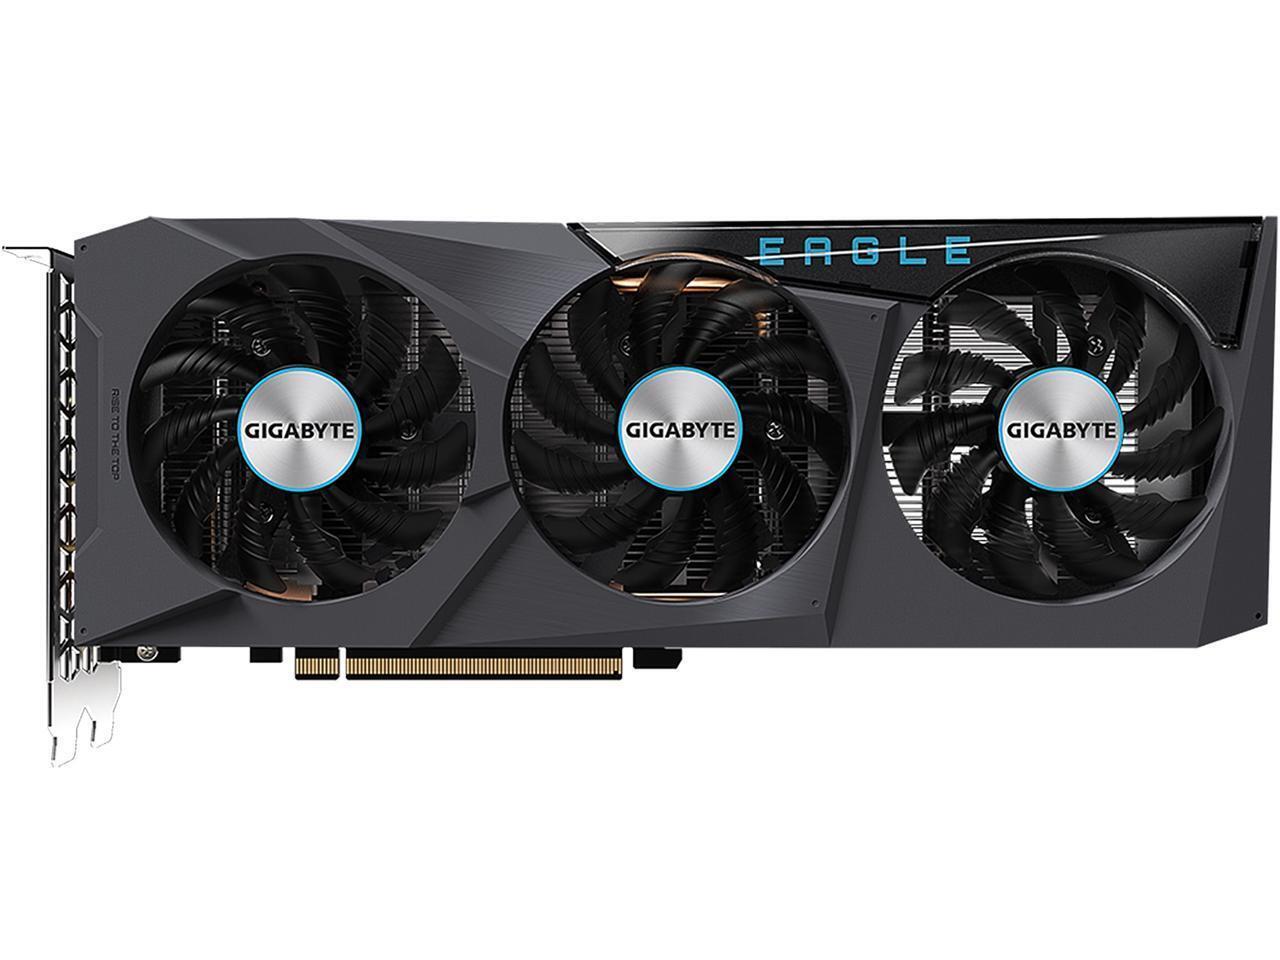 GIGABYTE Radeon RX 6600 EAGLE 8G Graphics Card, WINDFORCE 3X Cooling System, 8GB